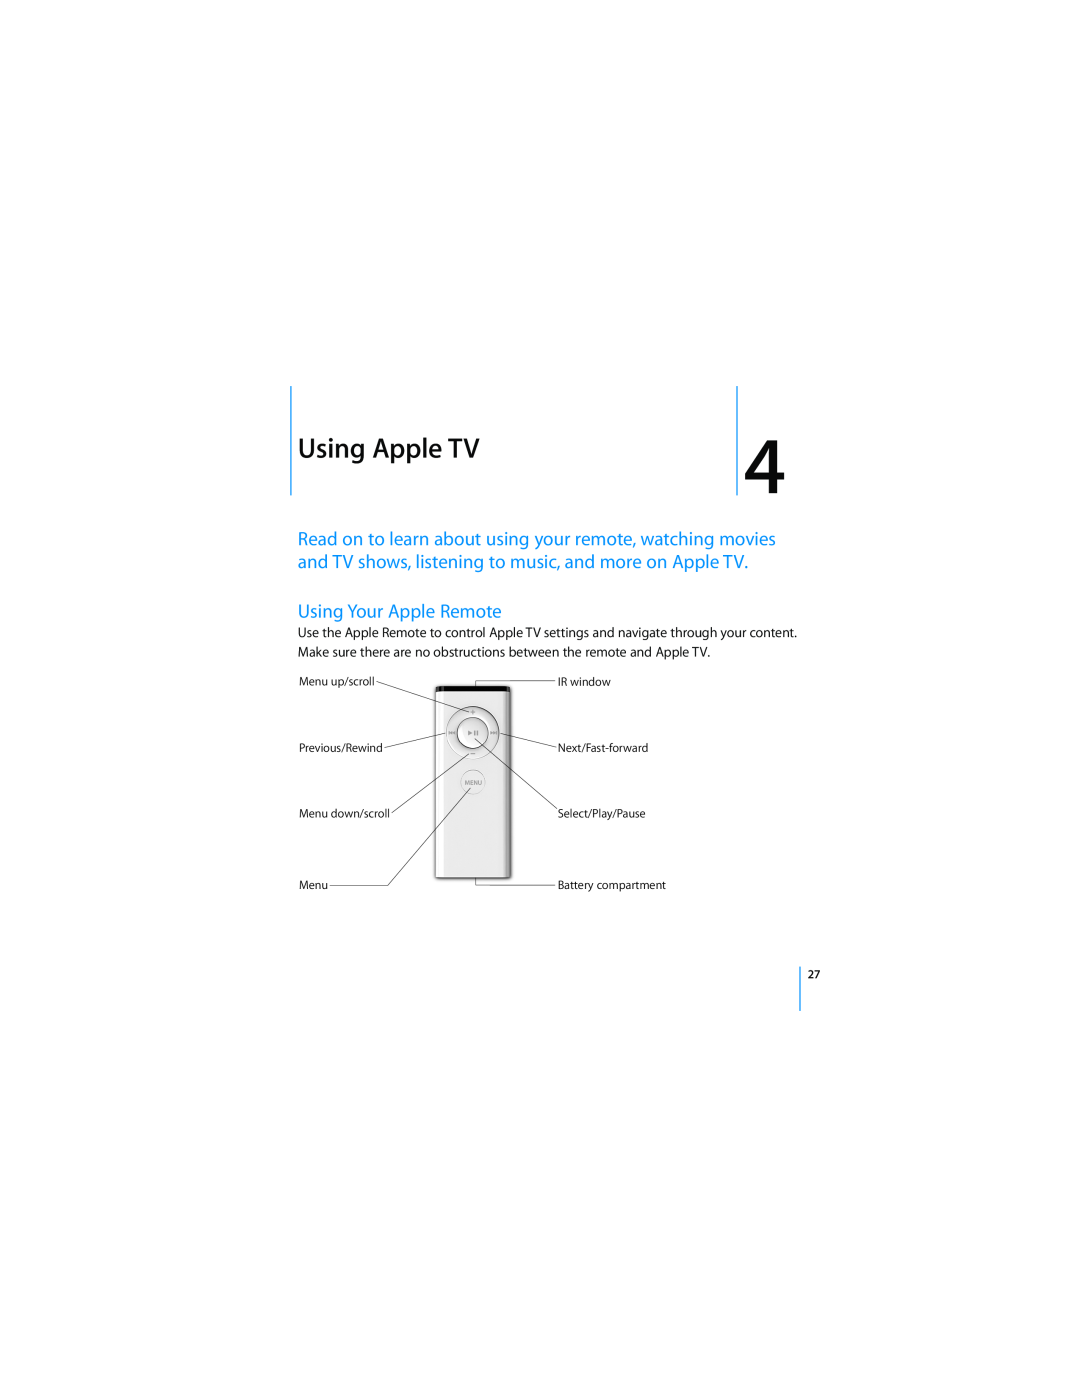 Apple manual Using Apple TV, Using Your Apple Remote, Battery compartment, Menu 